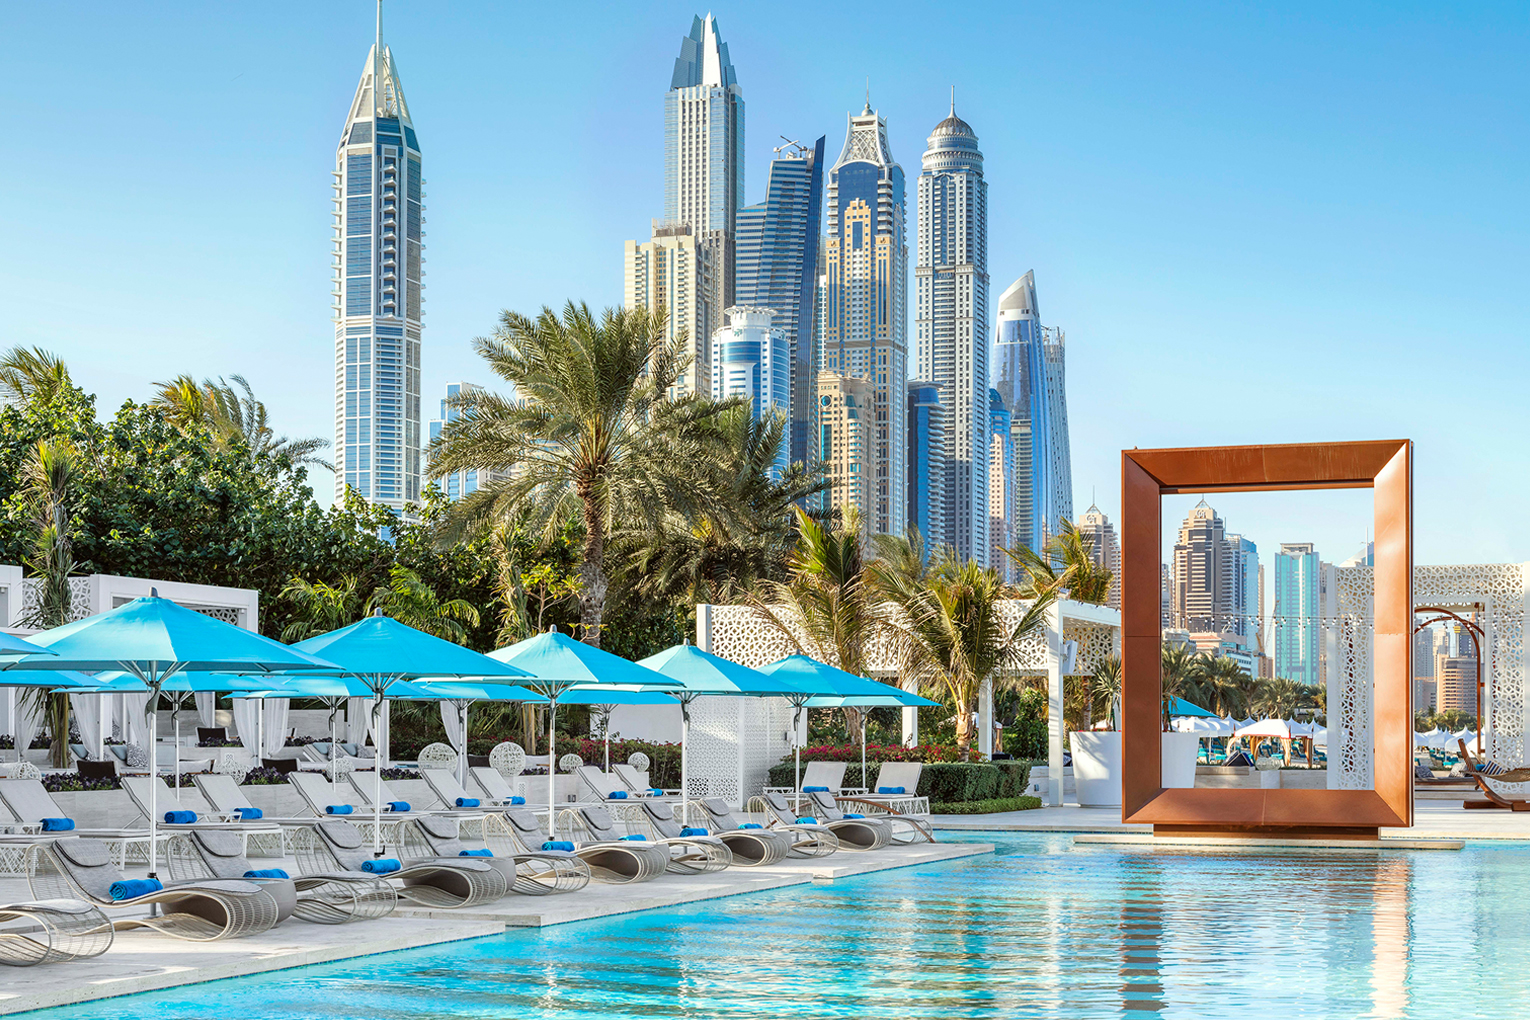 When Is The Next Long Weekend In The UAE? GQ Middle East